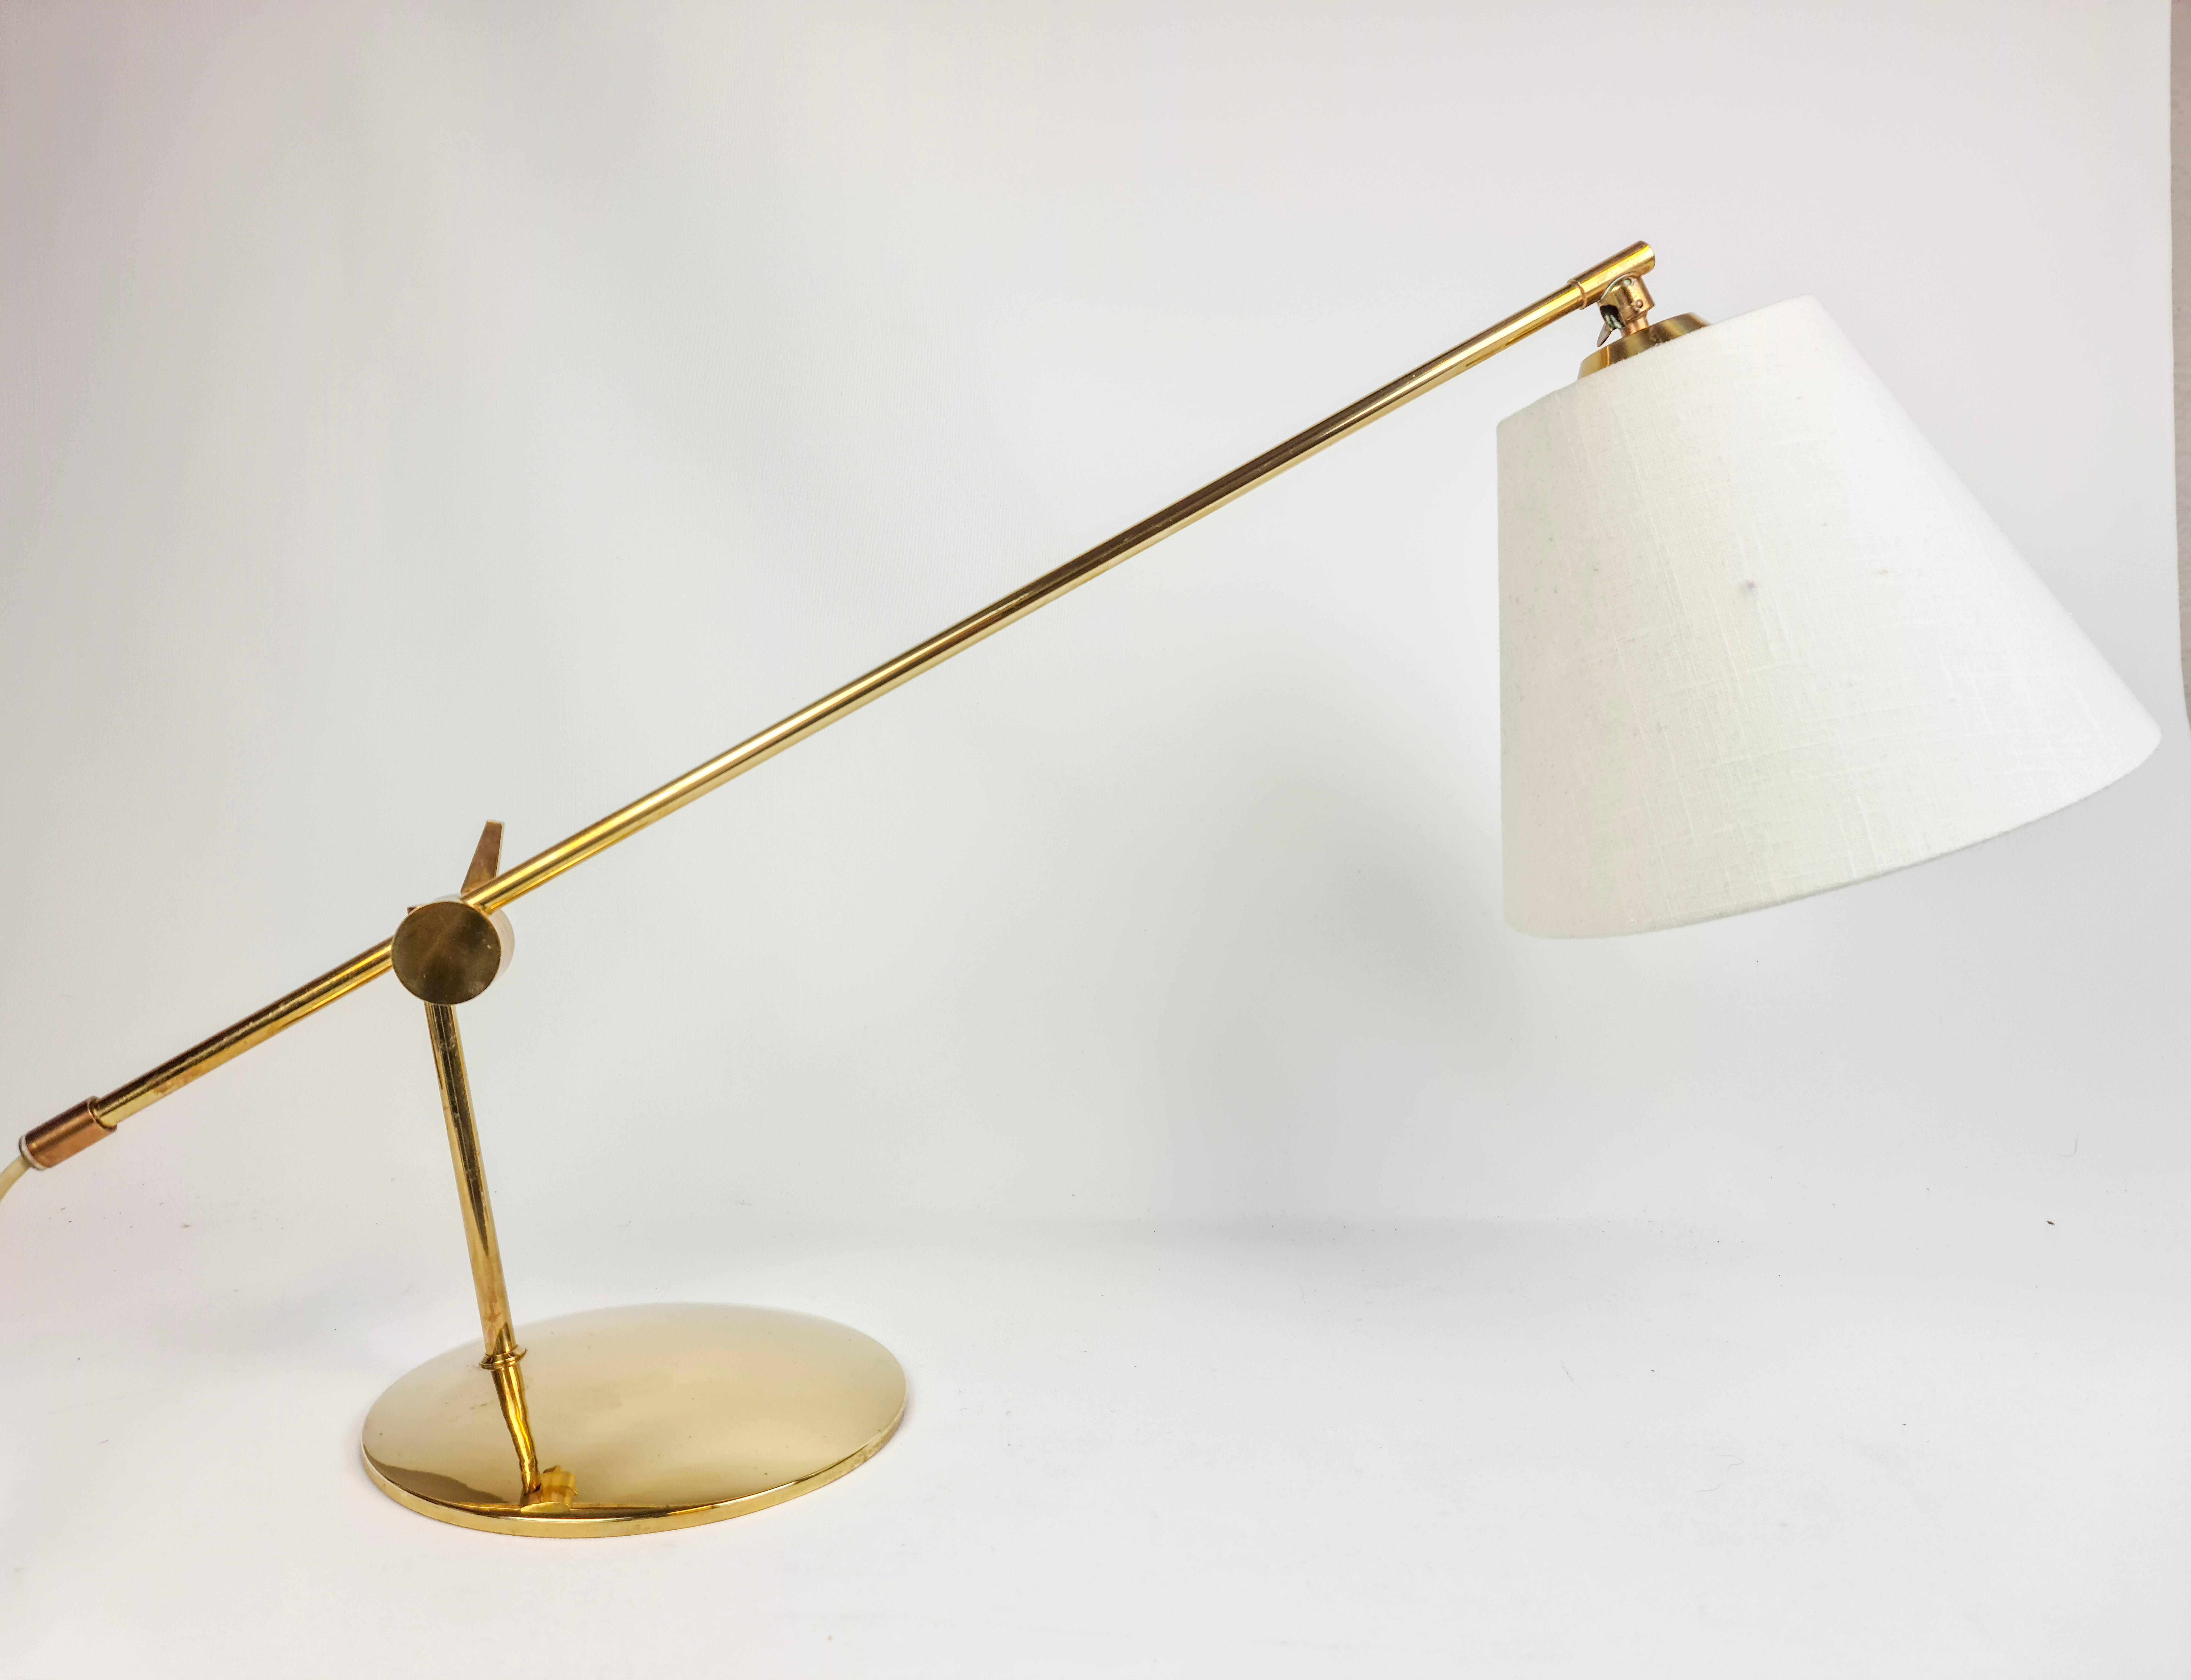 This nice table lamp in brass attributed to Poul Dinesen made in Denmark during the 1960s. 
It has a flexible arm for height and 360 movement, the shade is also moveable. 

Good working vintage condition.

Measures: L 71 cm, H 41 cm, D base 18